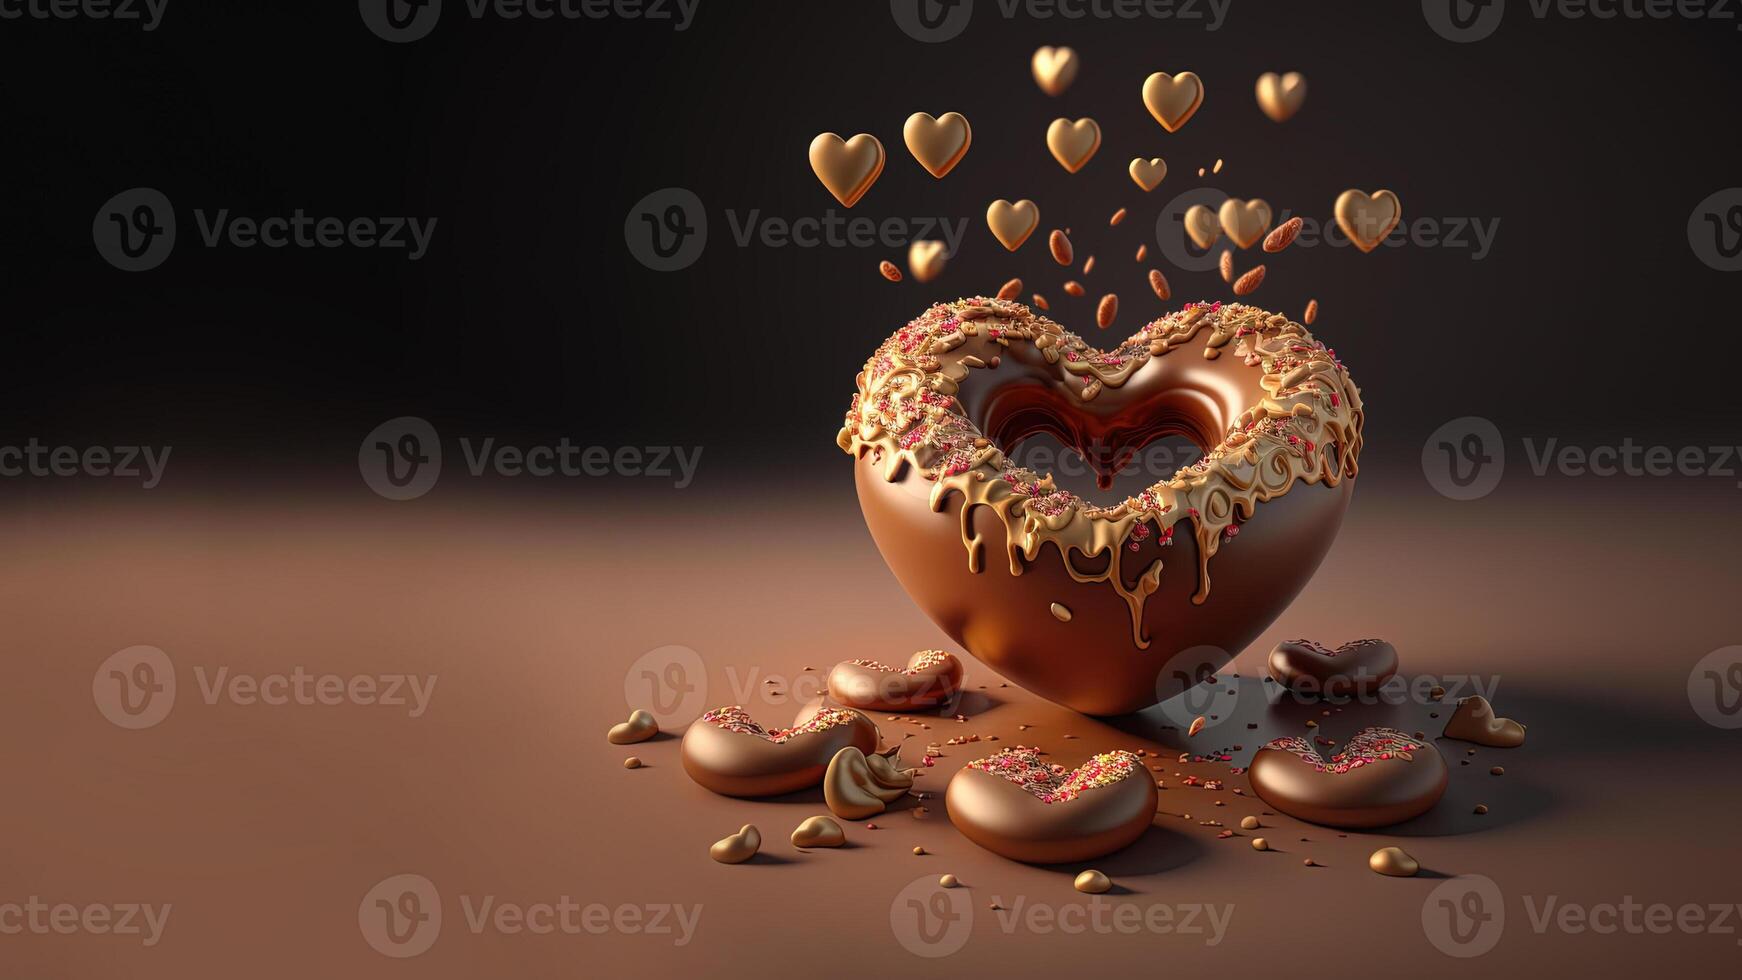 , Chocolate donut in heart shape with little hearts pastries on the table. Sweet food advertising banner. 3D effect, St. Valentine's romantic bakery concept, modern illustration photo